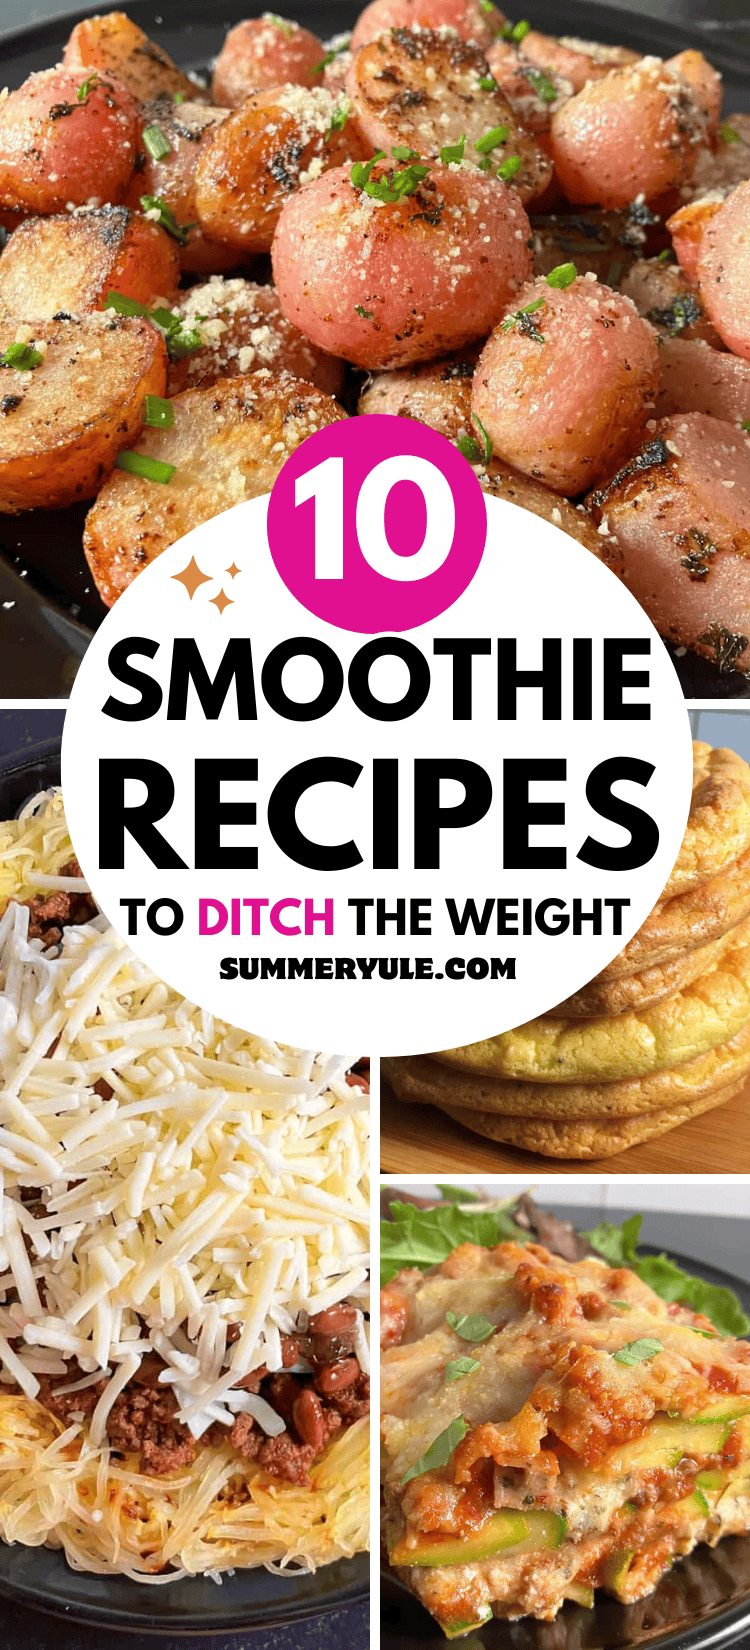 Smoothie Recipes Ditch Weight